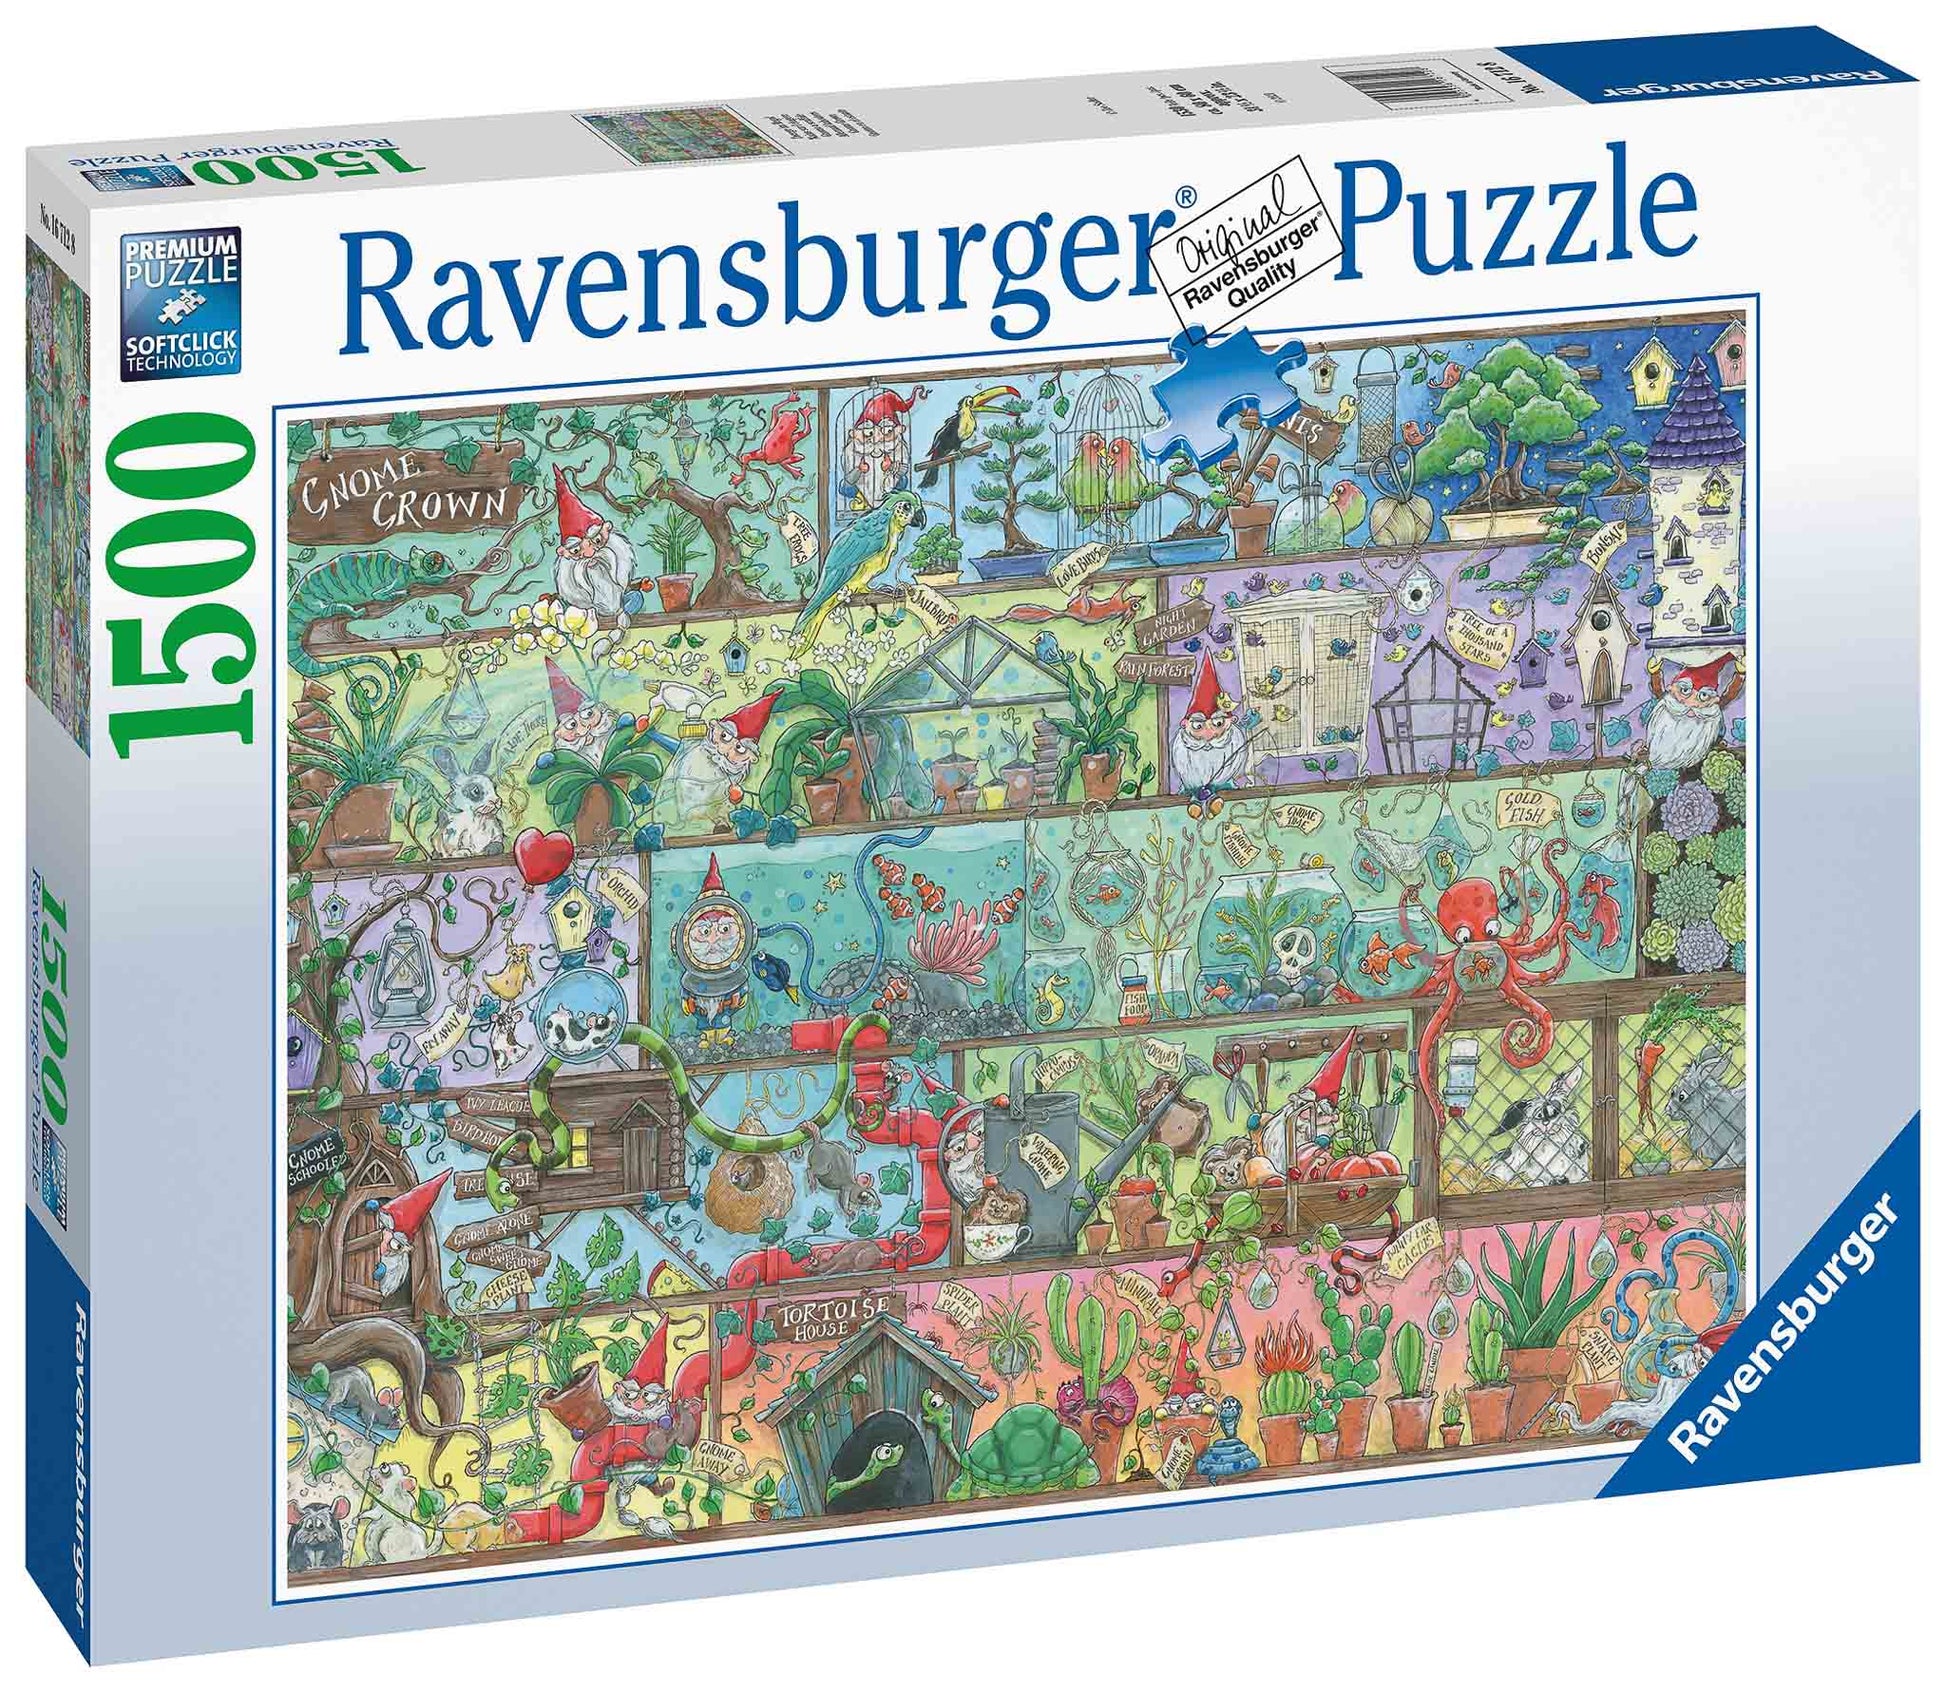 Ravensburger Gnome Grown 1500 Piece Jigsaw Puzzle High Quality Buy or Rent